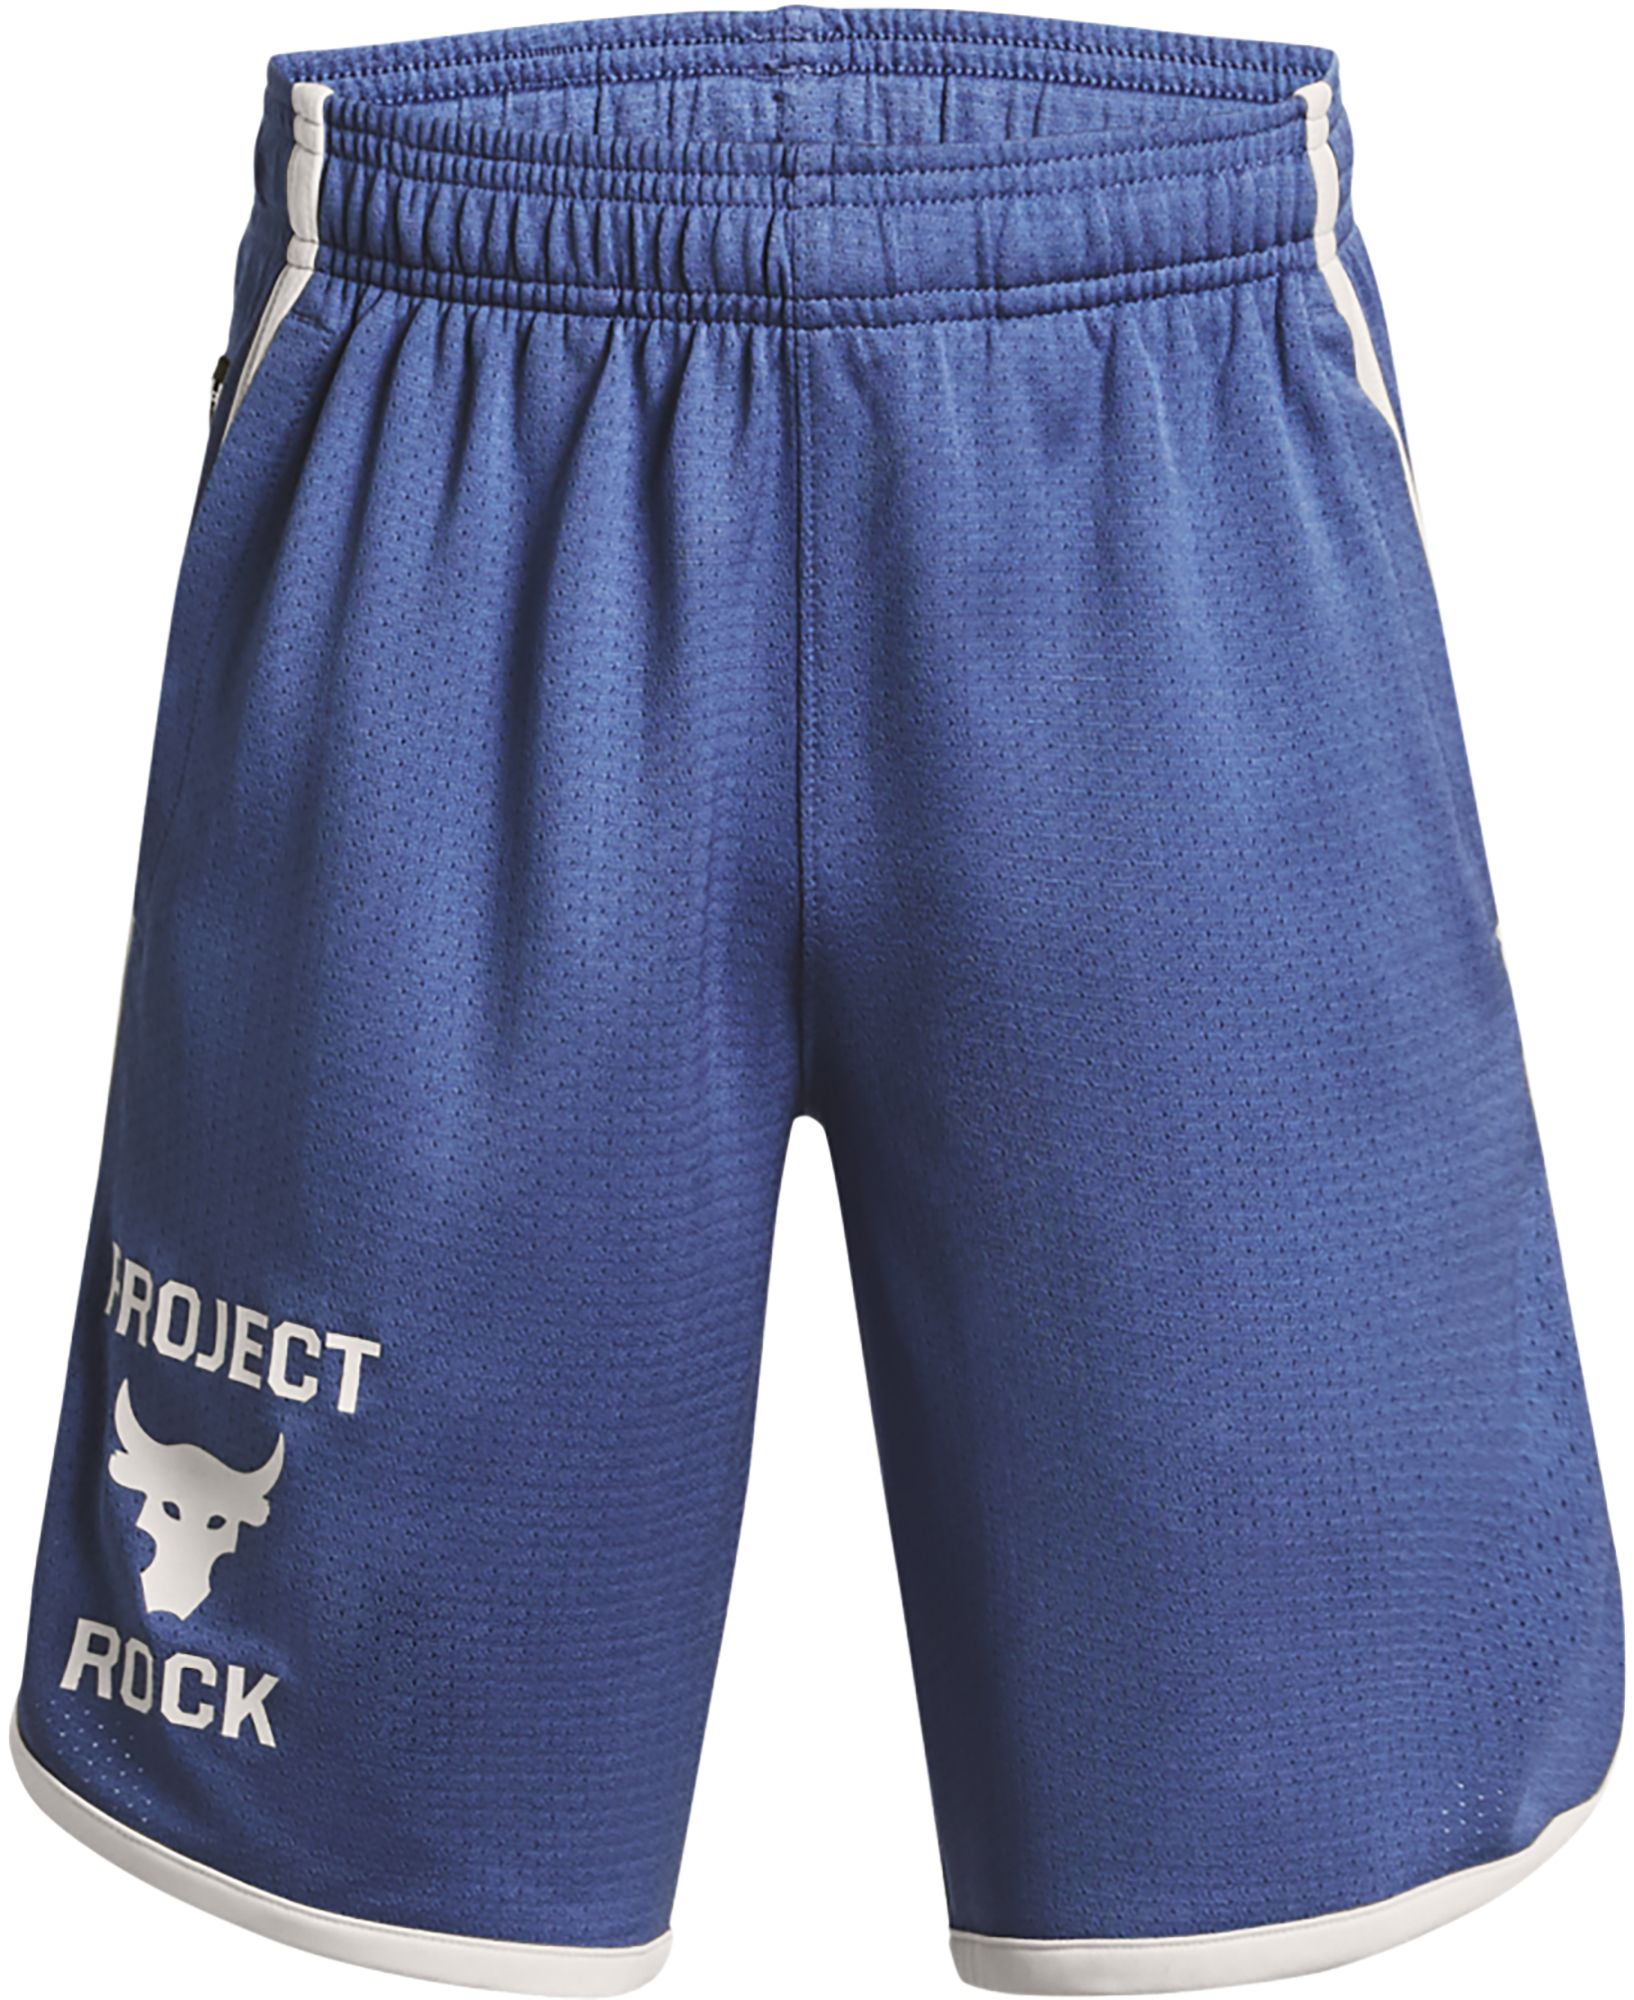 Under Armour Boys Project Rock Mesh Shorts